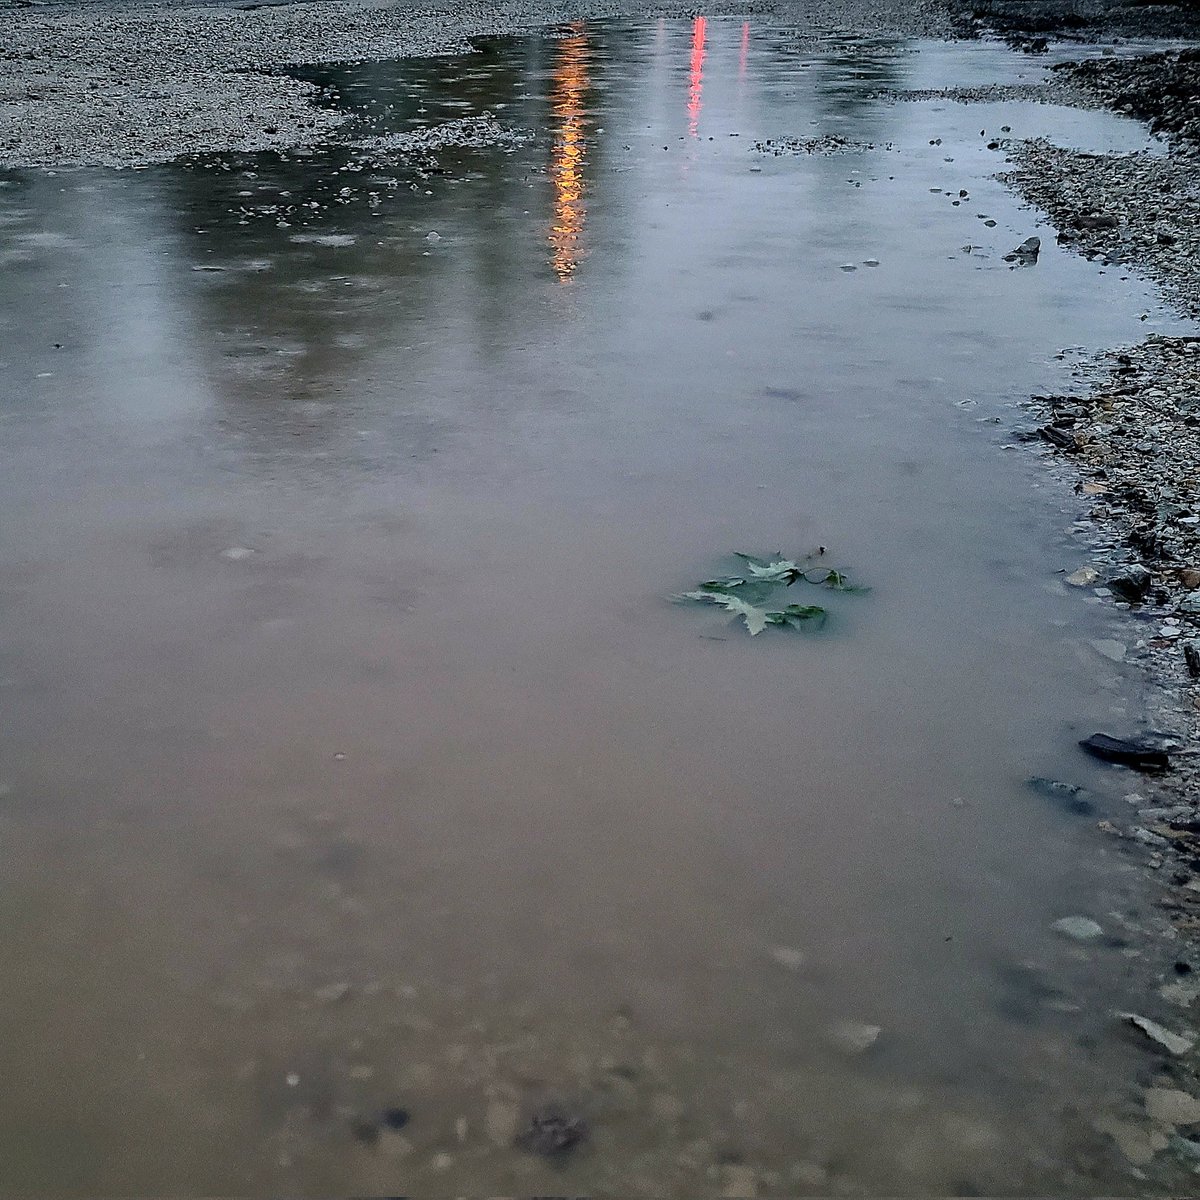 Walking in the rain, but a little #PuddleReflection first thing in the morning is good for the soul. 62F #MorningWalk #Dawn #Sunrise #BestTimeOfDay #WonderingWhileWalking #Photography #TakeAnotherShot #DontLoseFocus #DoItForYou #GetAfterIt #PhotoChallenge2024